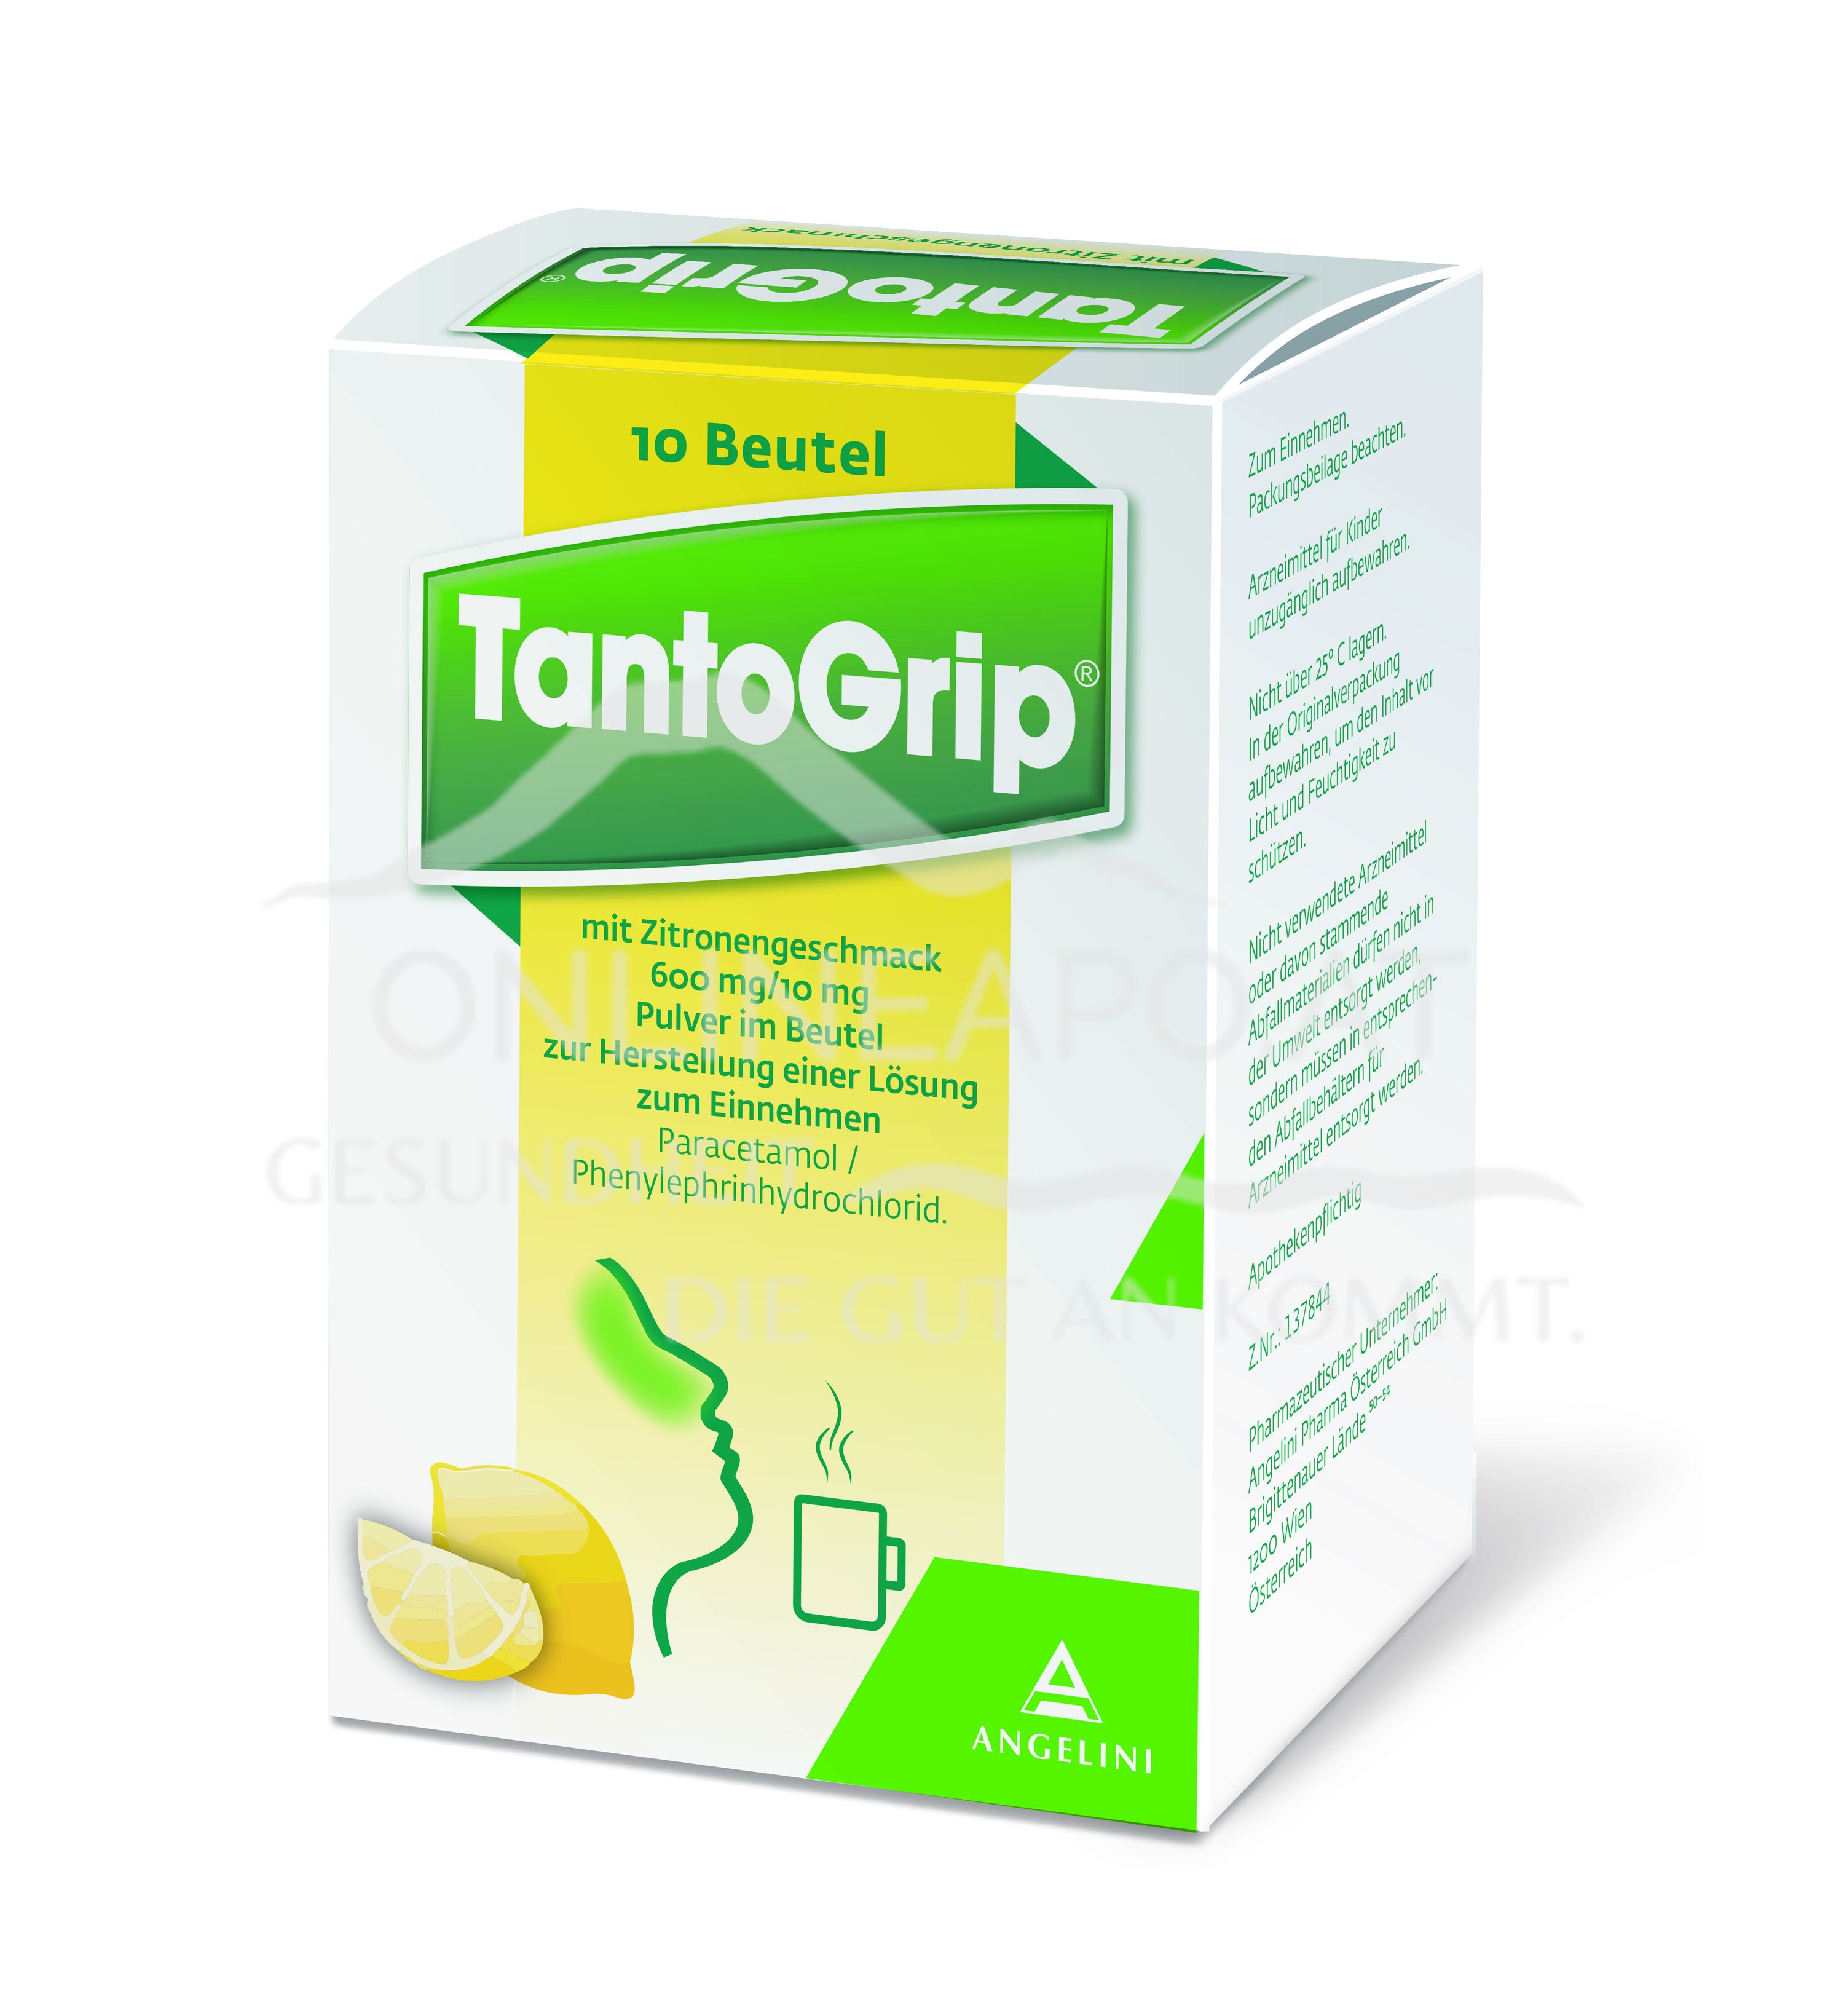 TantoGrip® Zitrone 600mg/10mg Pulver